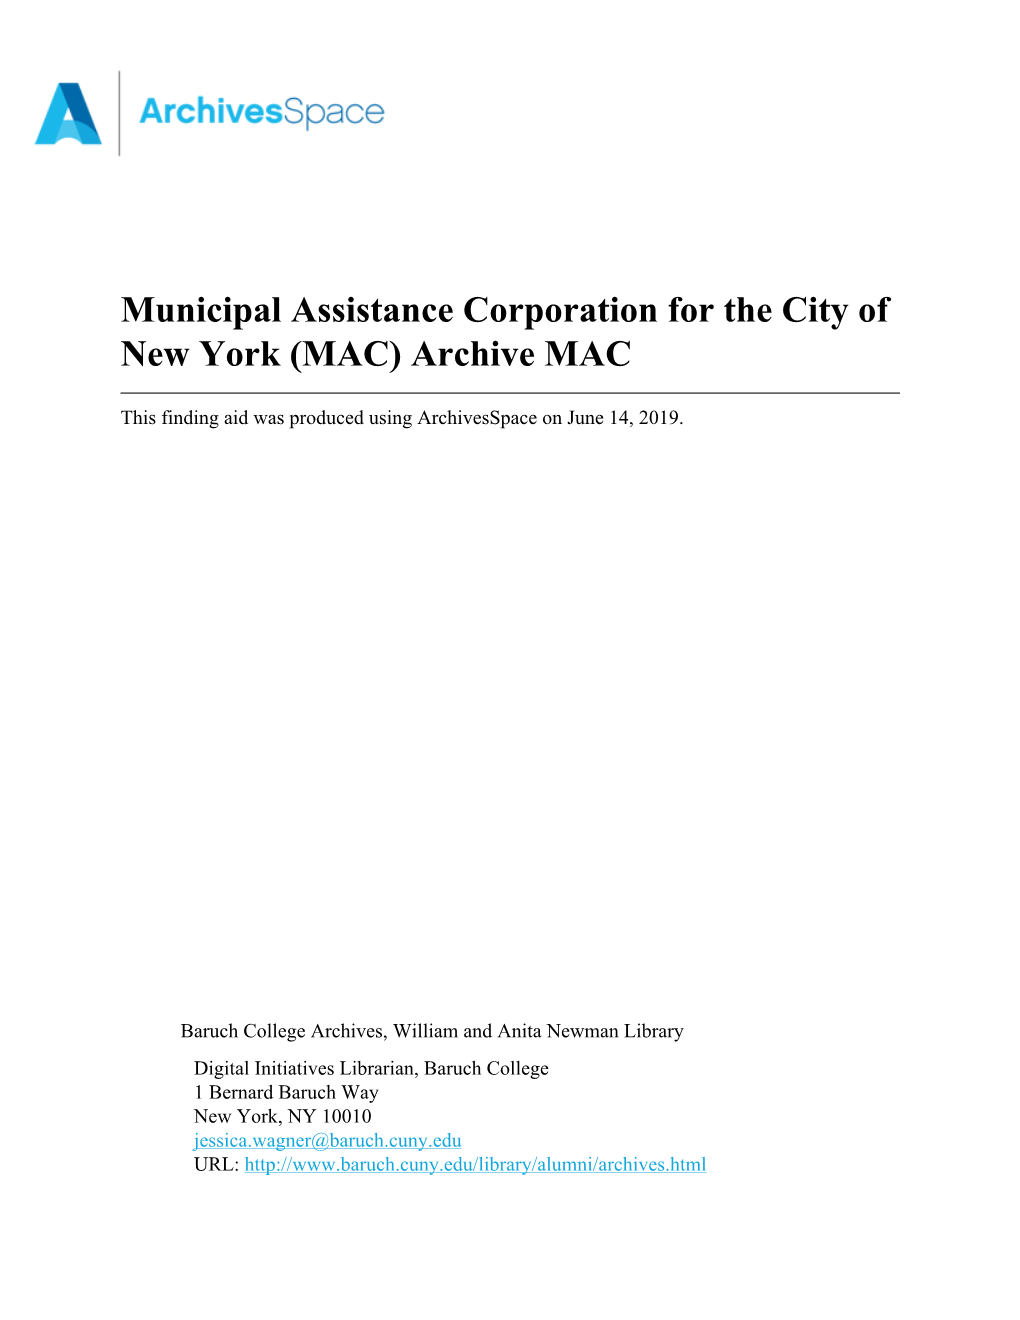 Municipal Assistance Corporation for the City of New York (MAC) Archive MAC